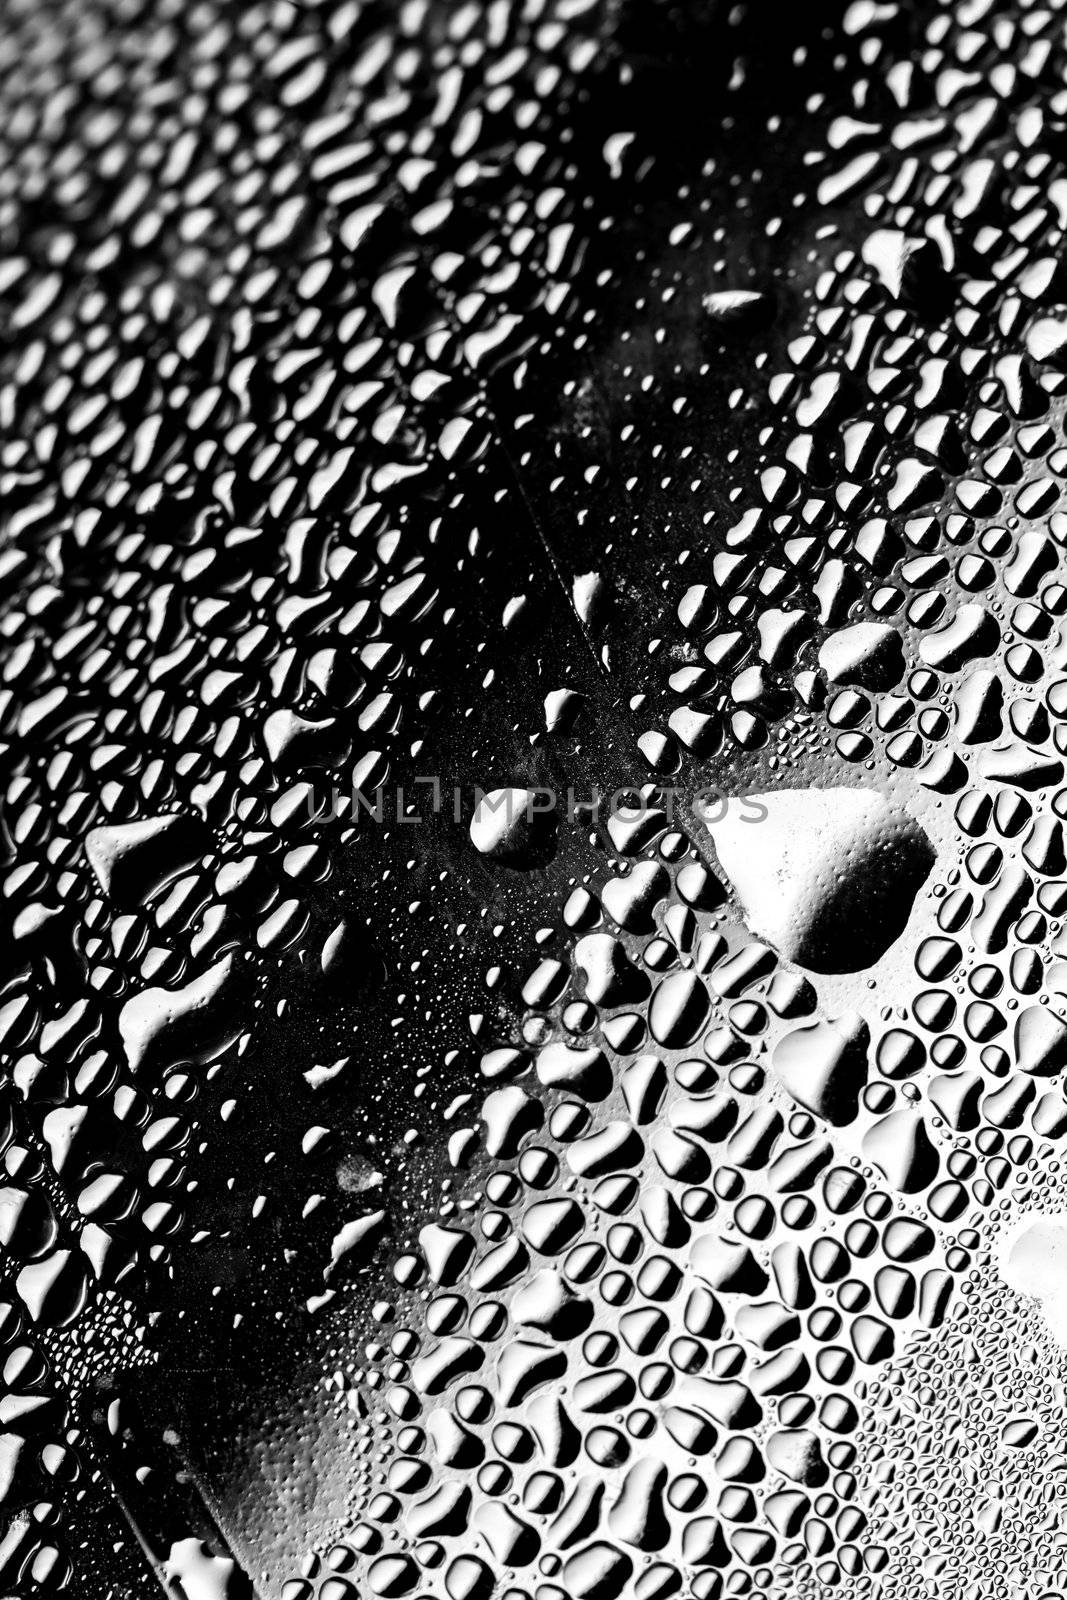 condensation water drops on a plastic surface